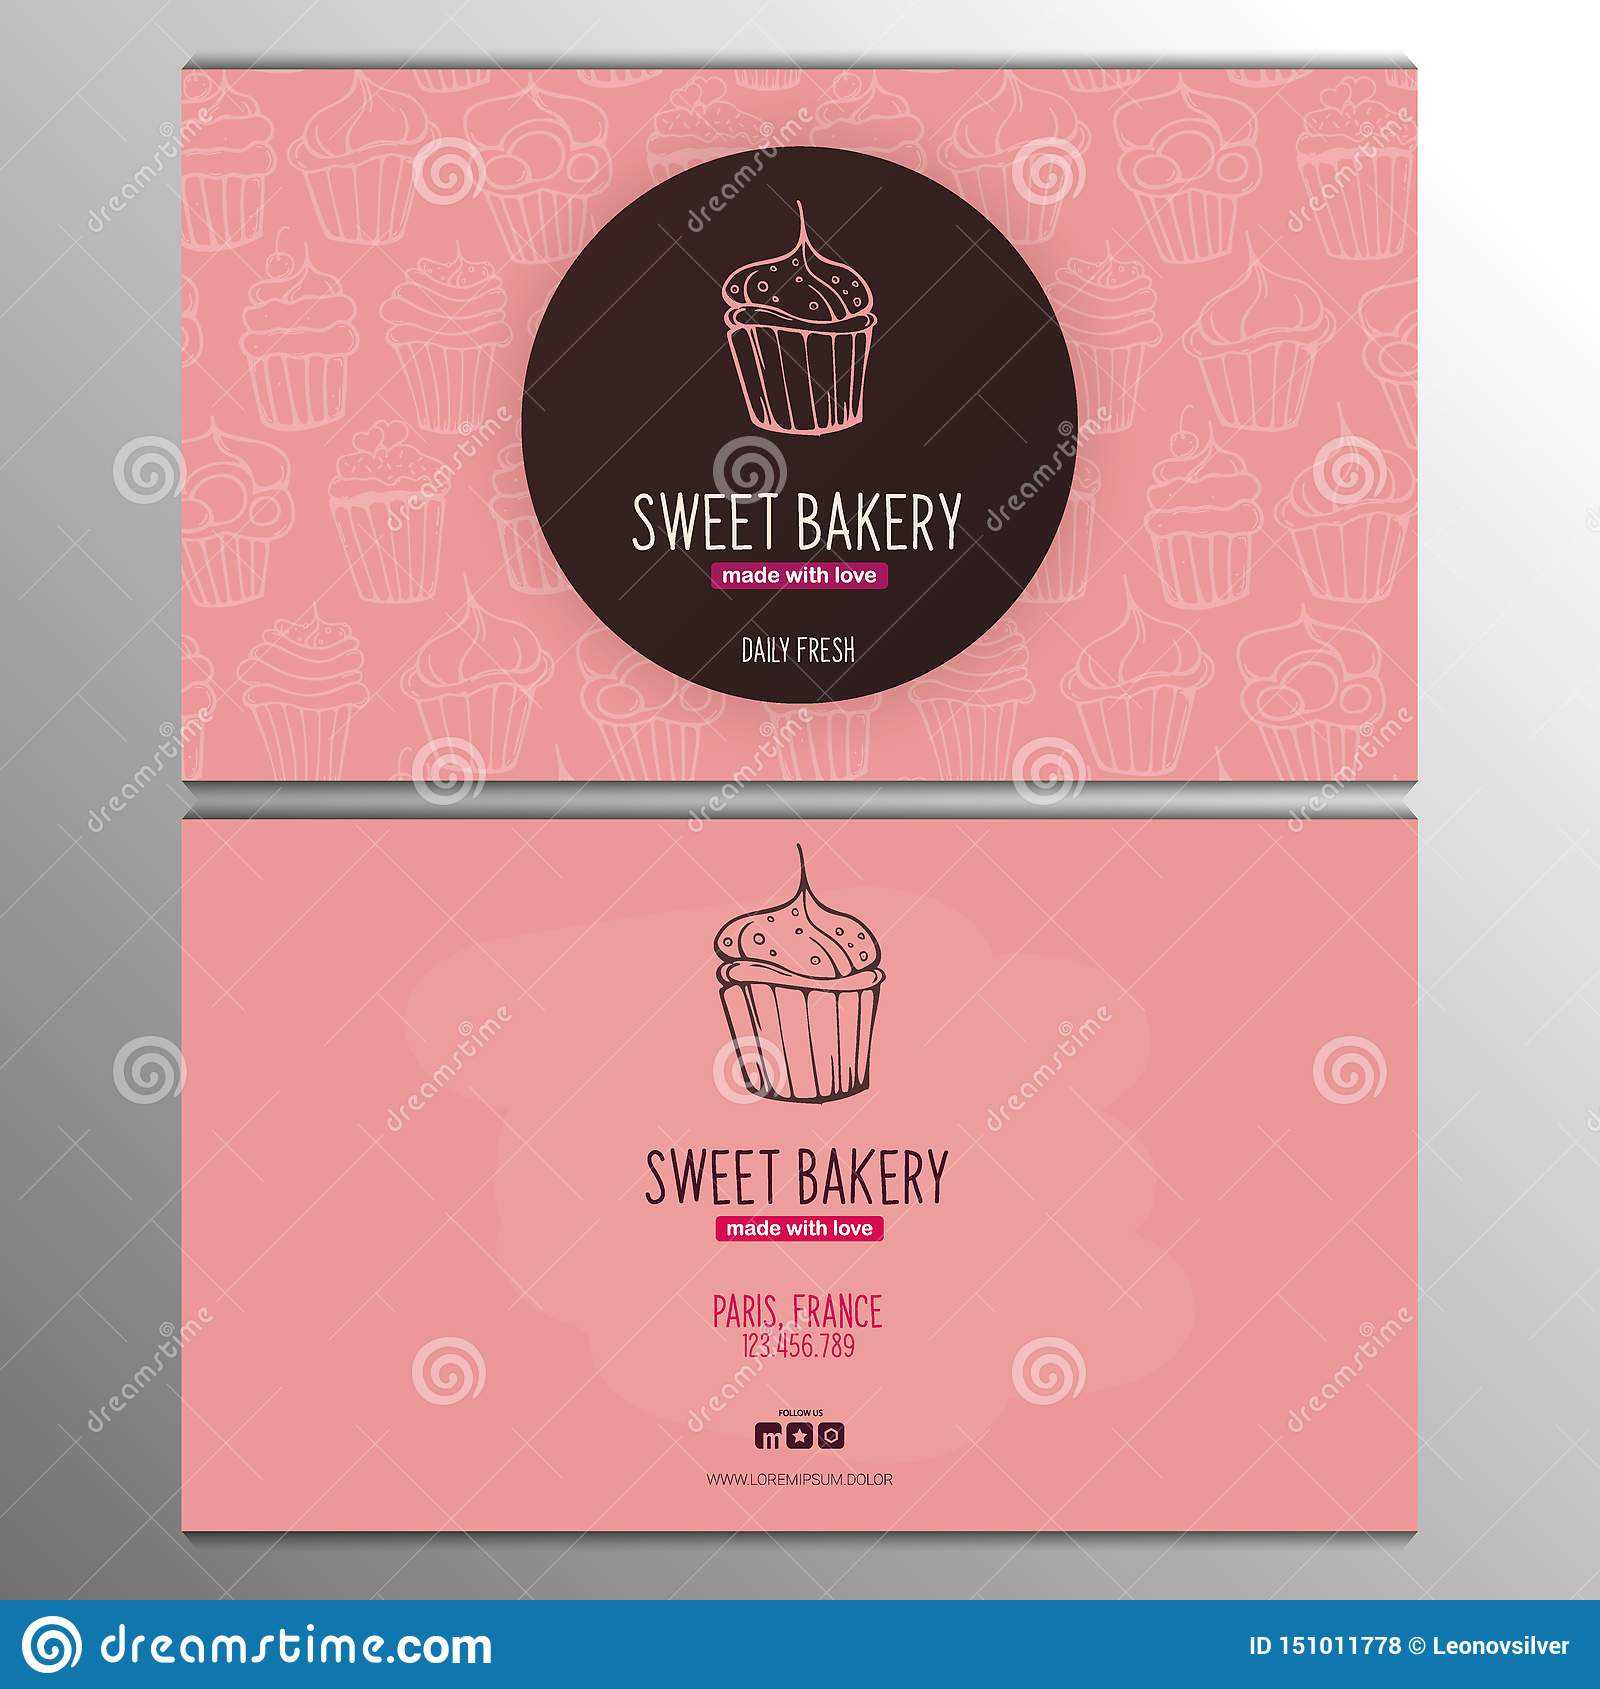 Cupcake Or Cake Business Card Template For Bakery Or Pastry With Cake Business Cards Templates Free